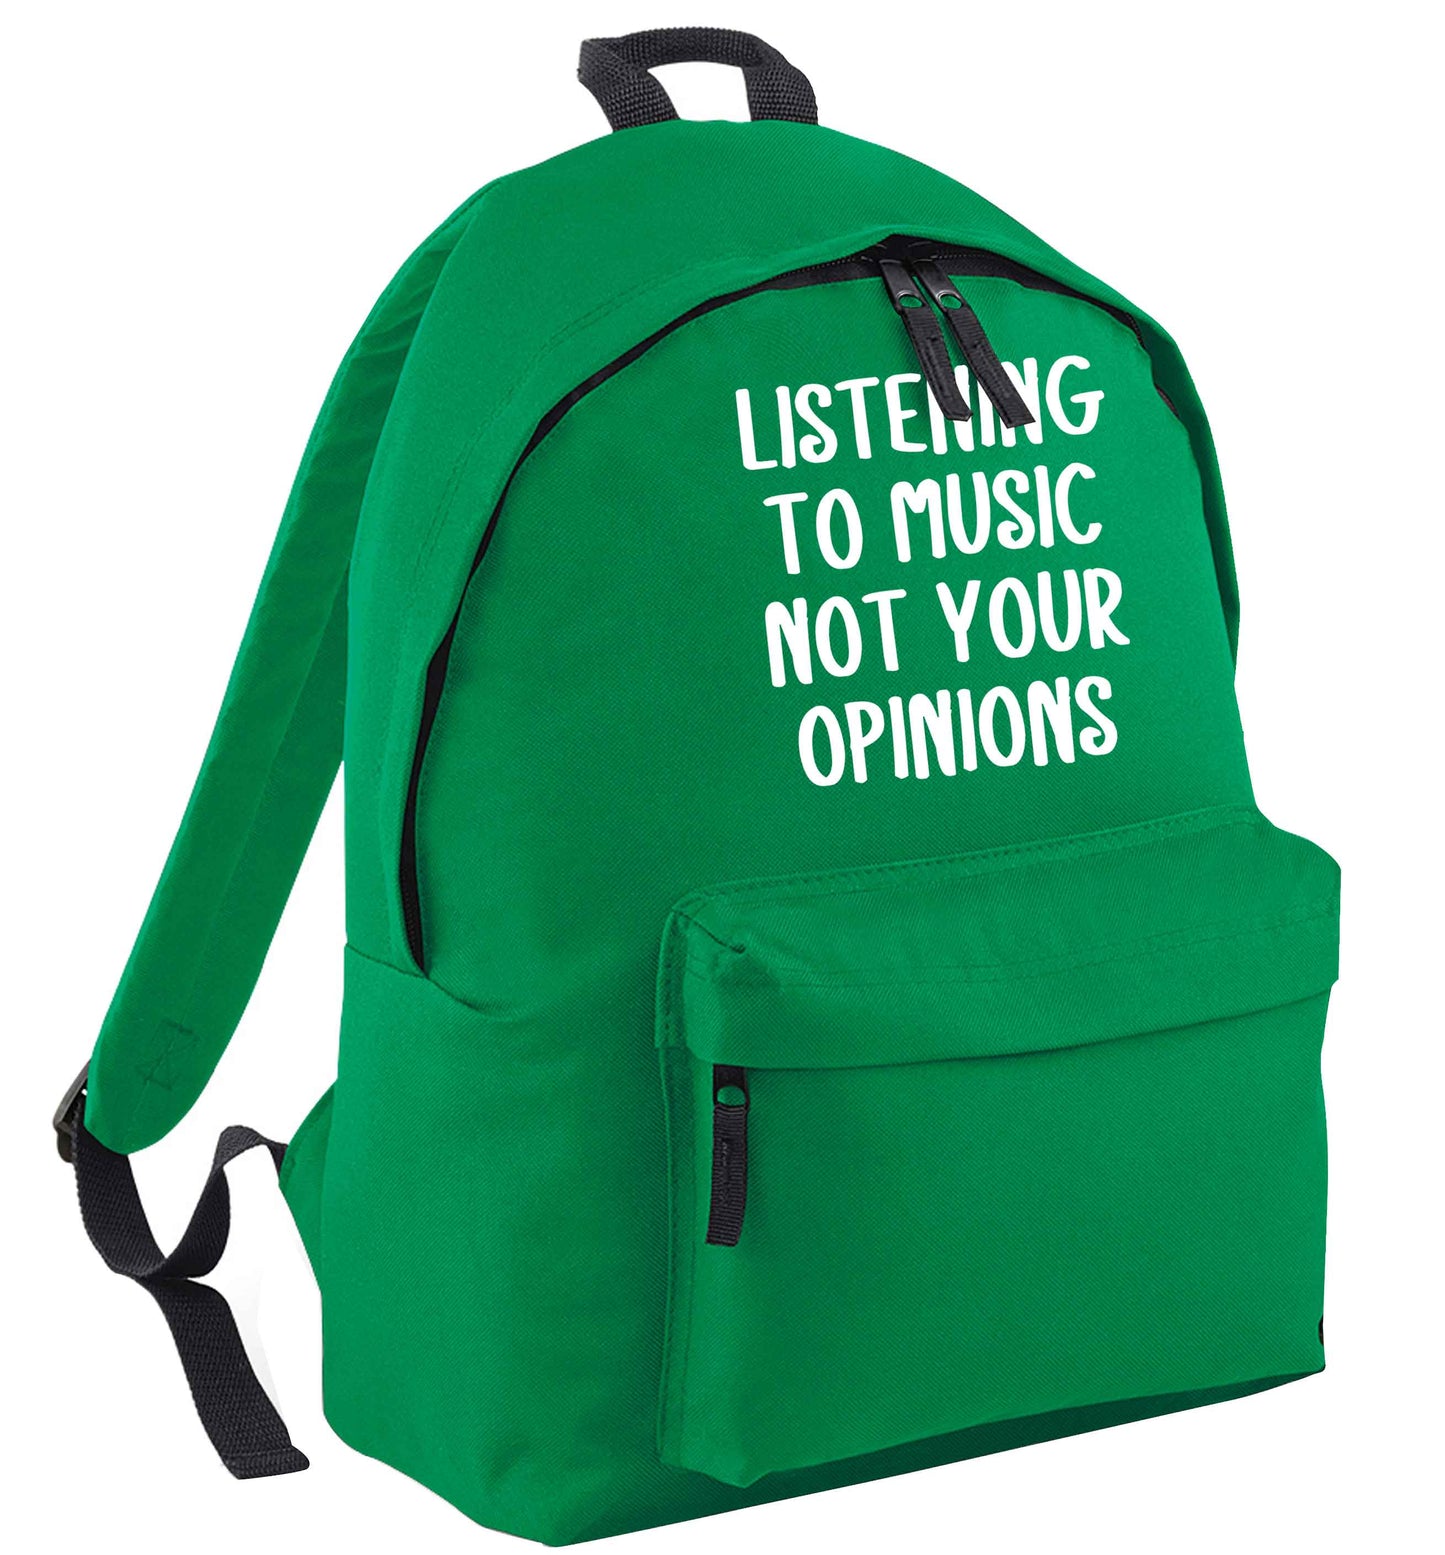 Listening to music not your opinions green adults backpack